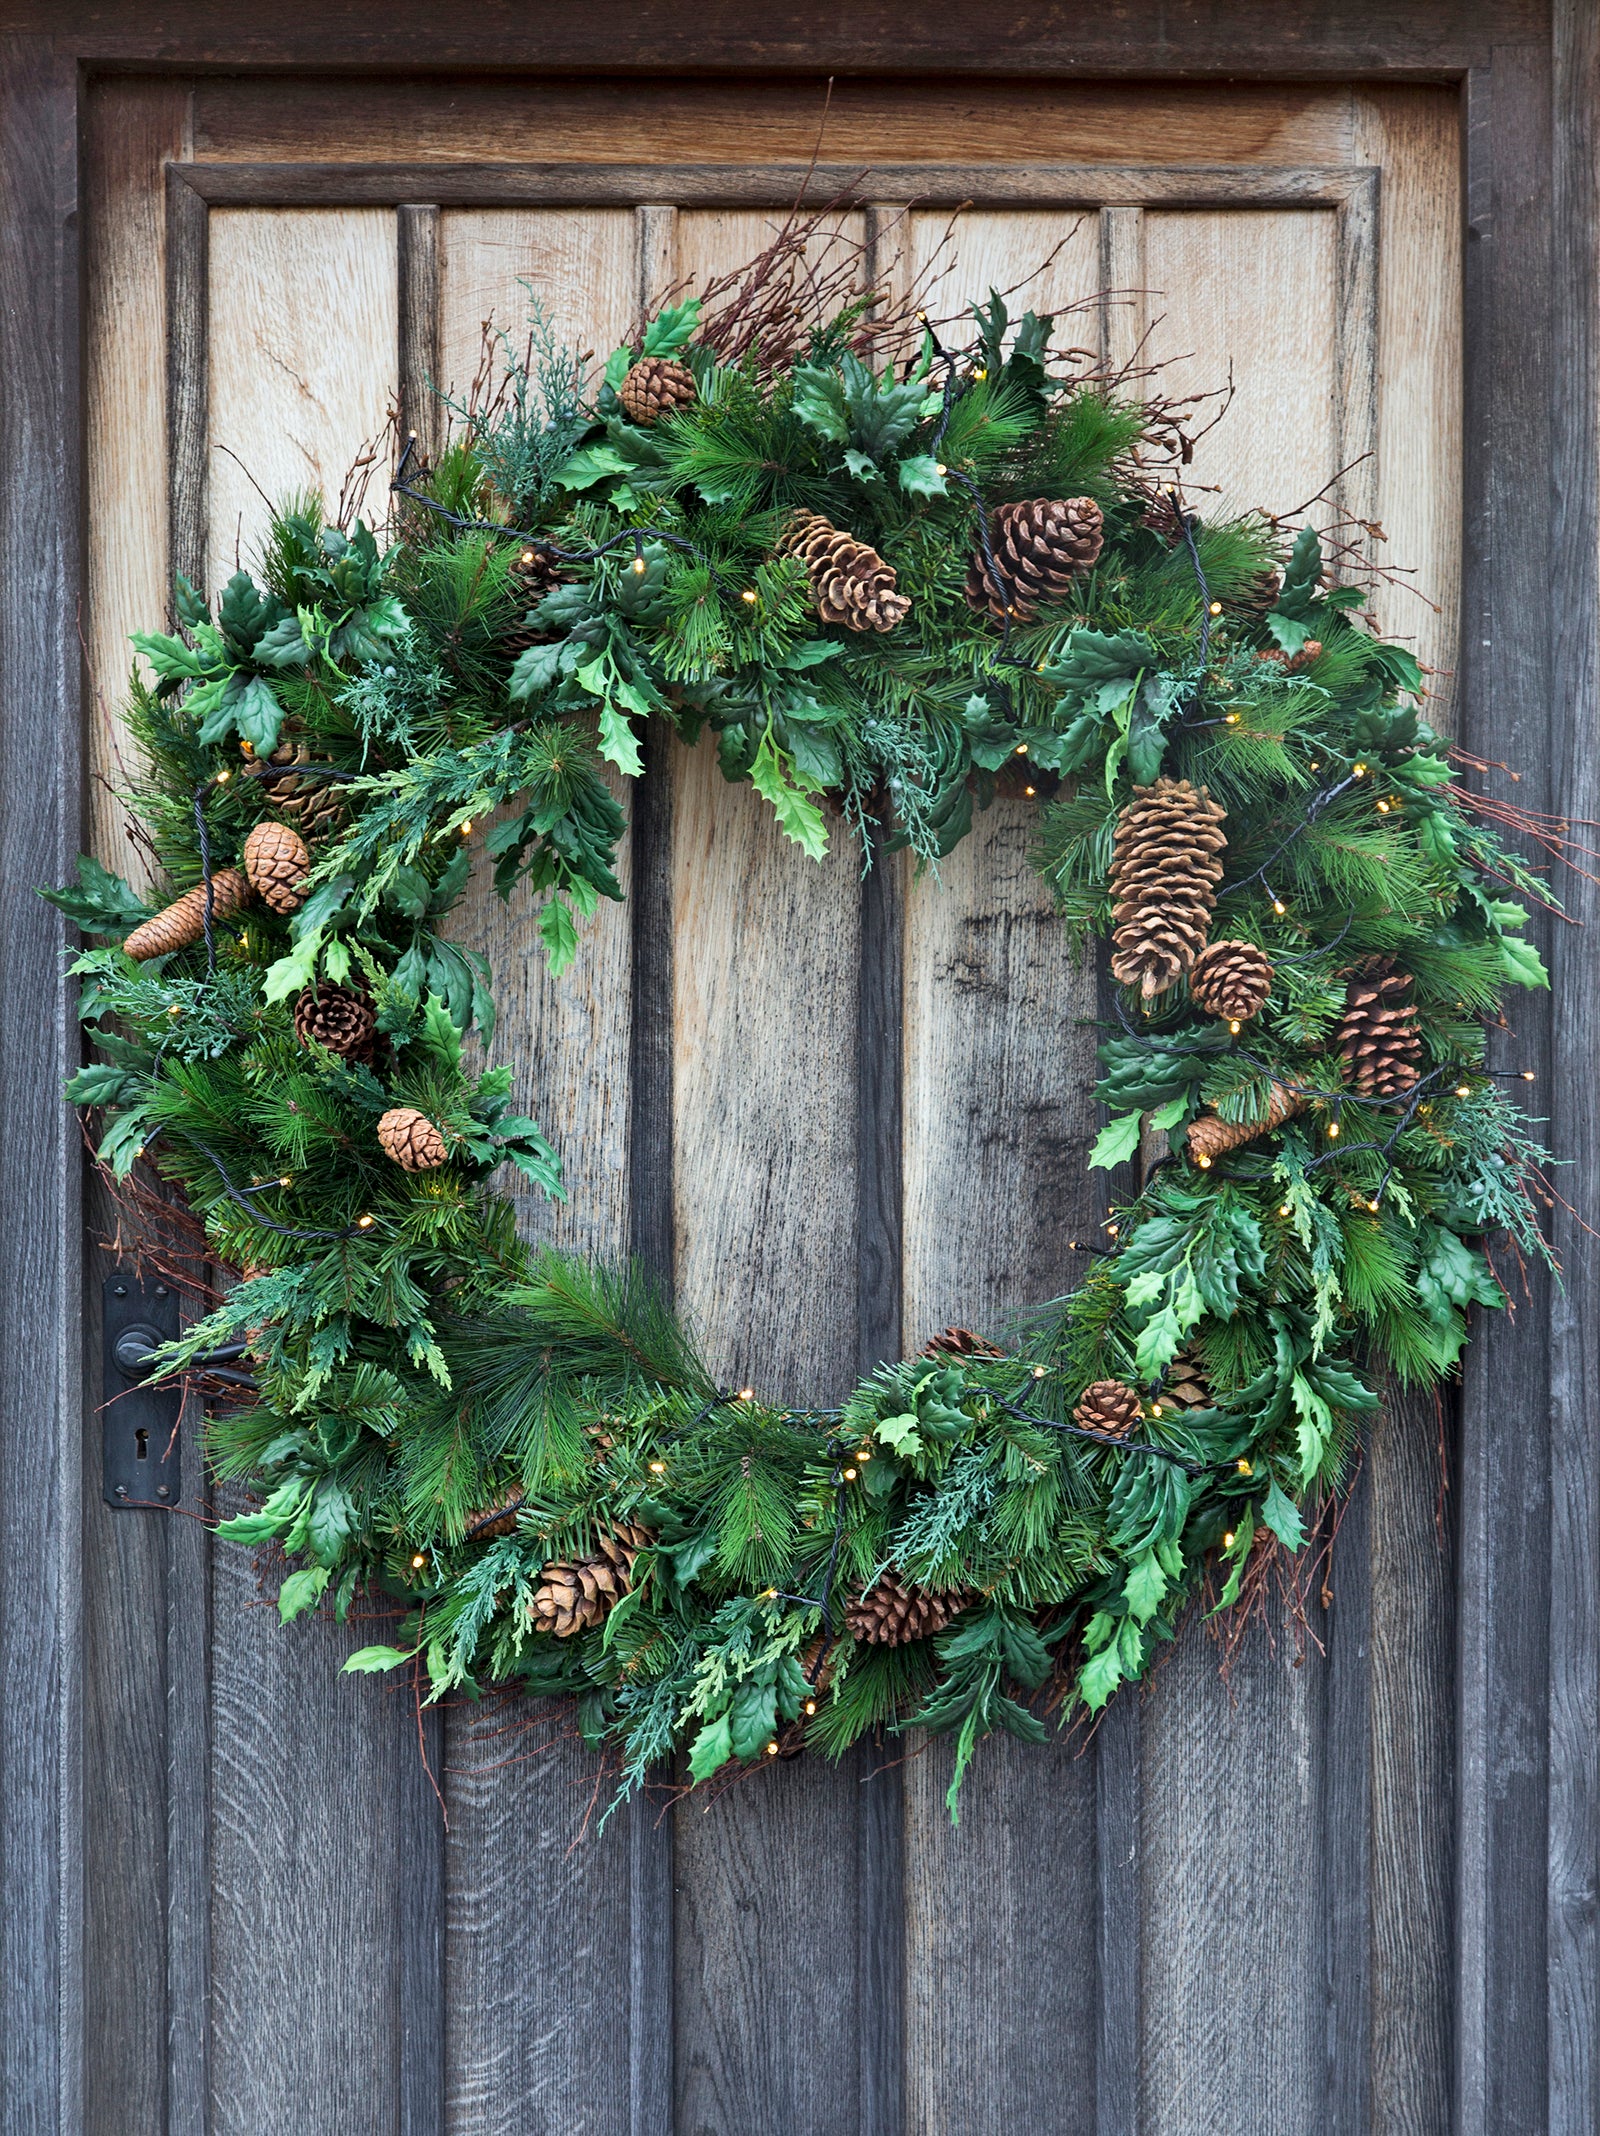 Christmas wreath decorated with pinecones, on old wooden door.